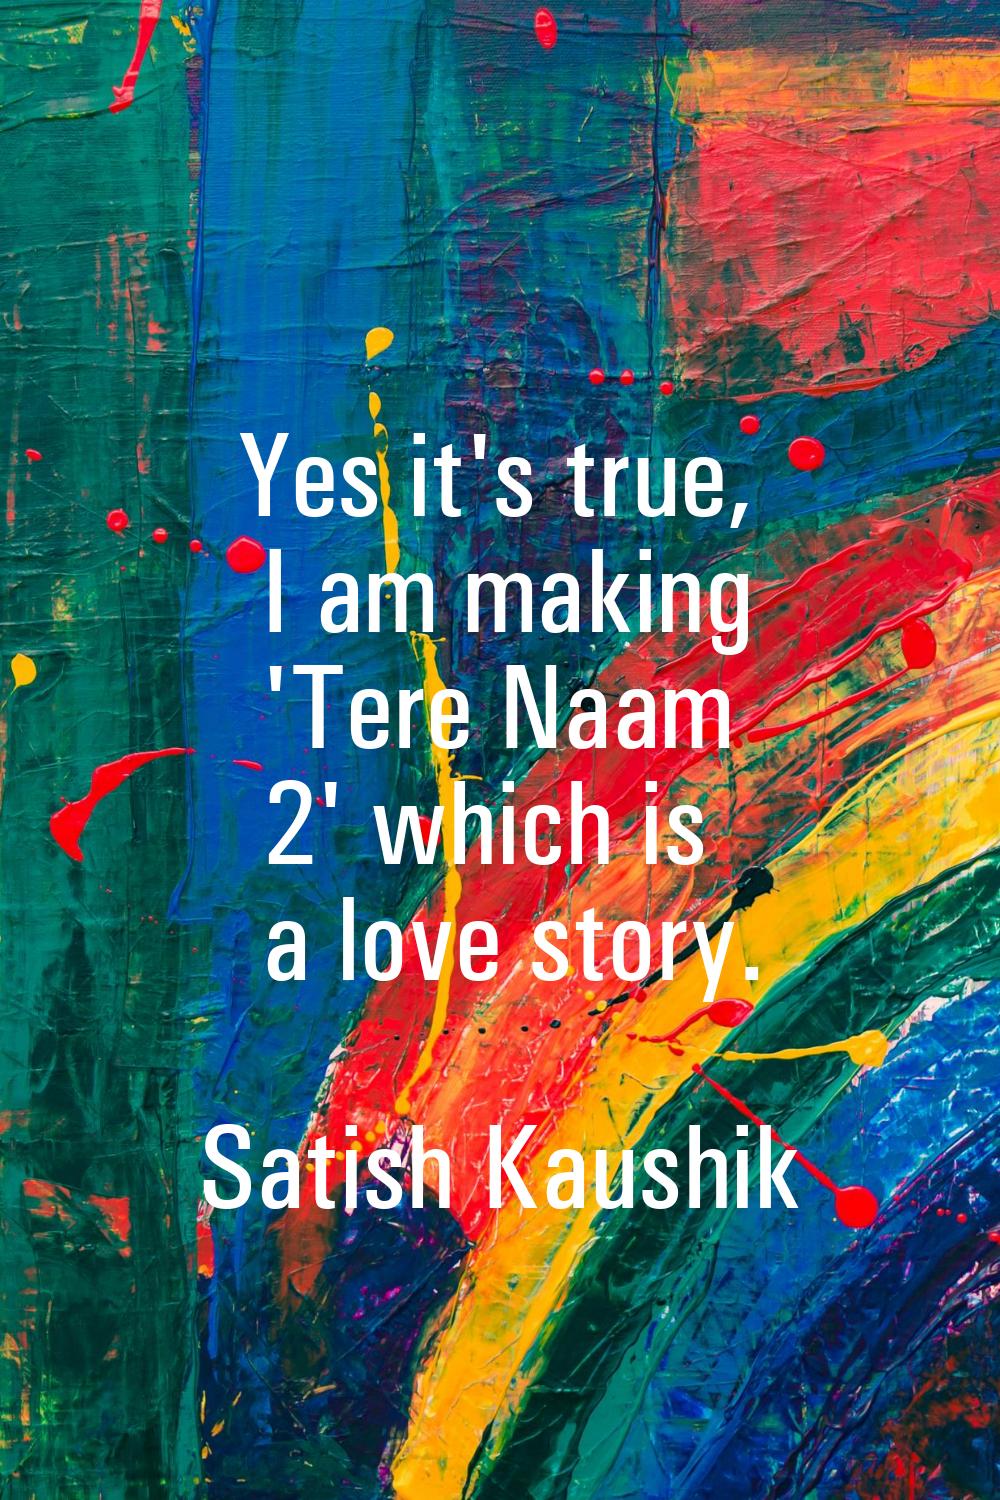 Yes it's true, I am making 'Tere Naam 2' which is a love story.